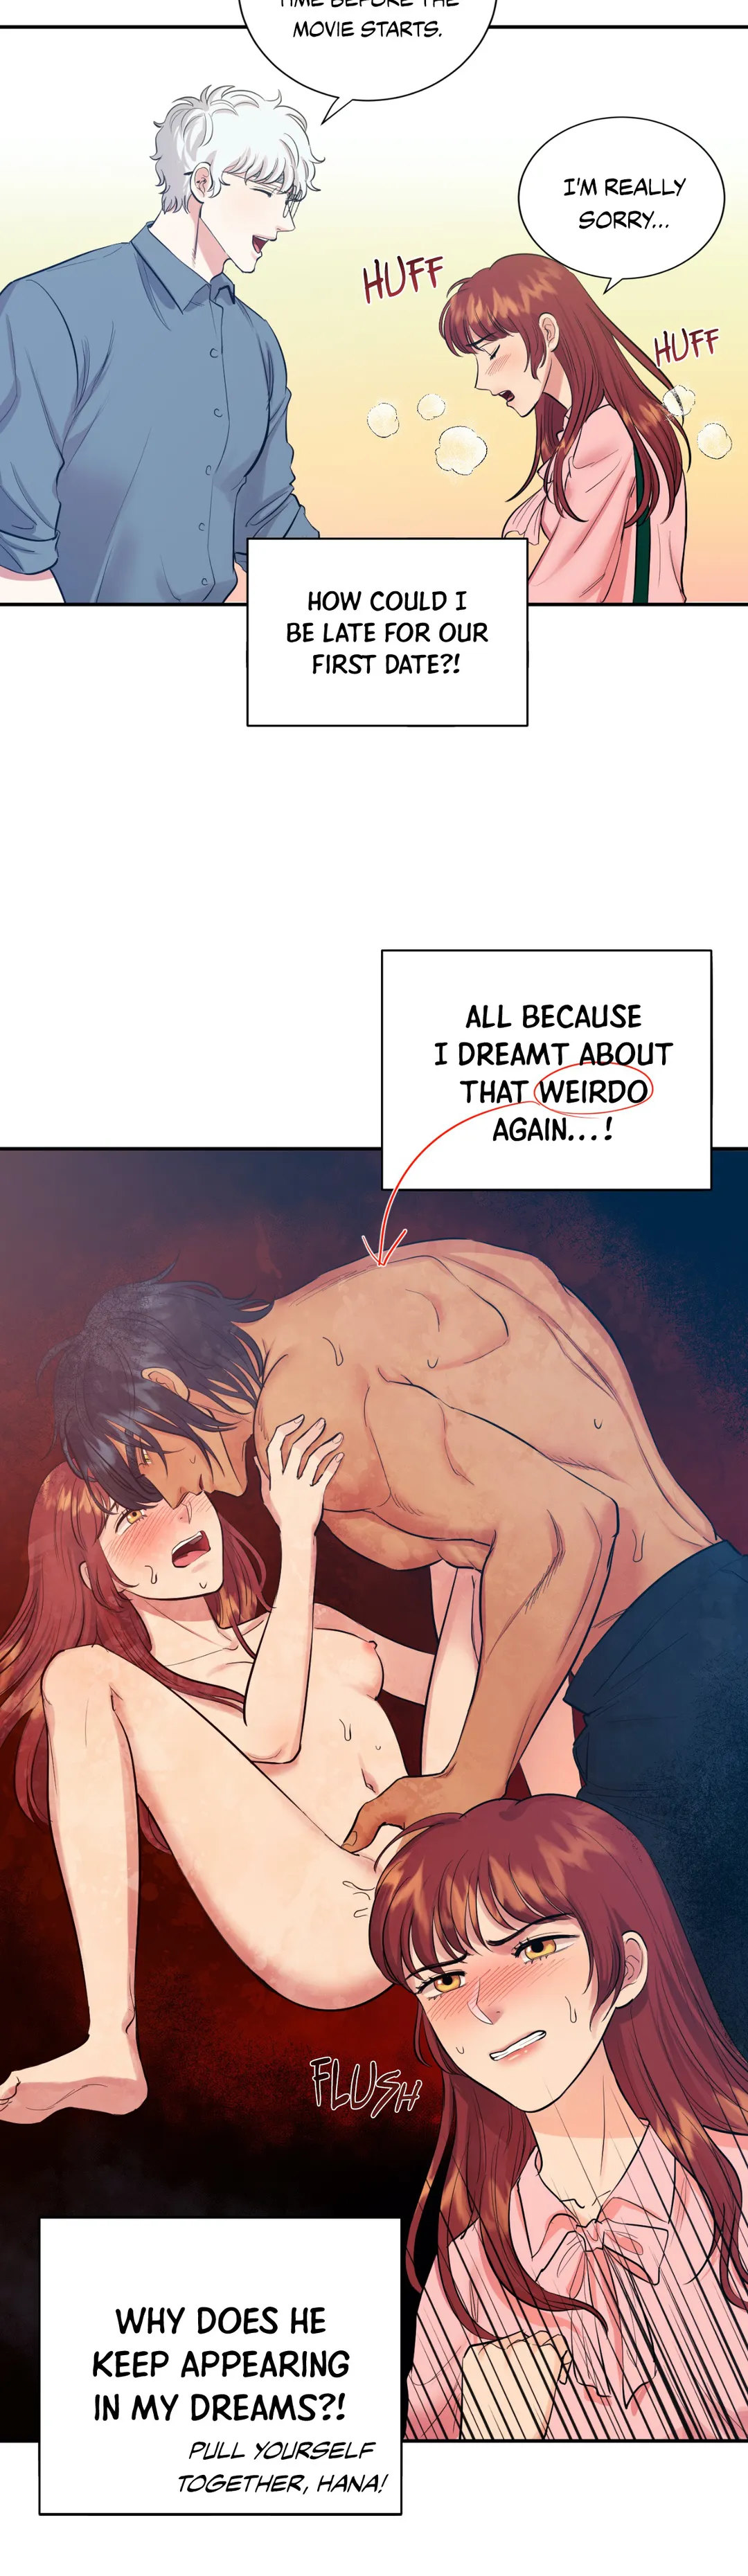 Hana’s Demons of Lust - Chapter 9 Page 7